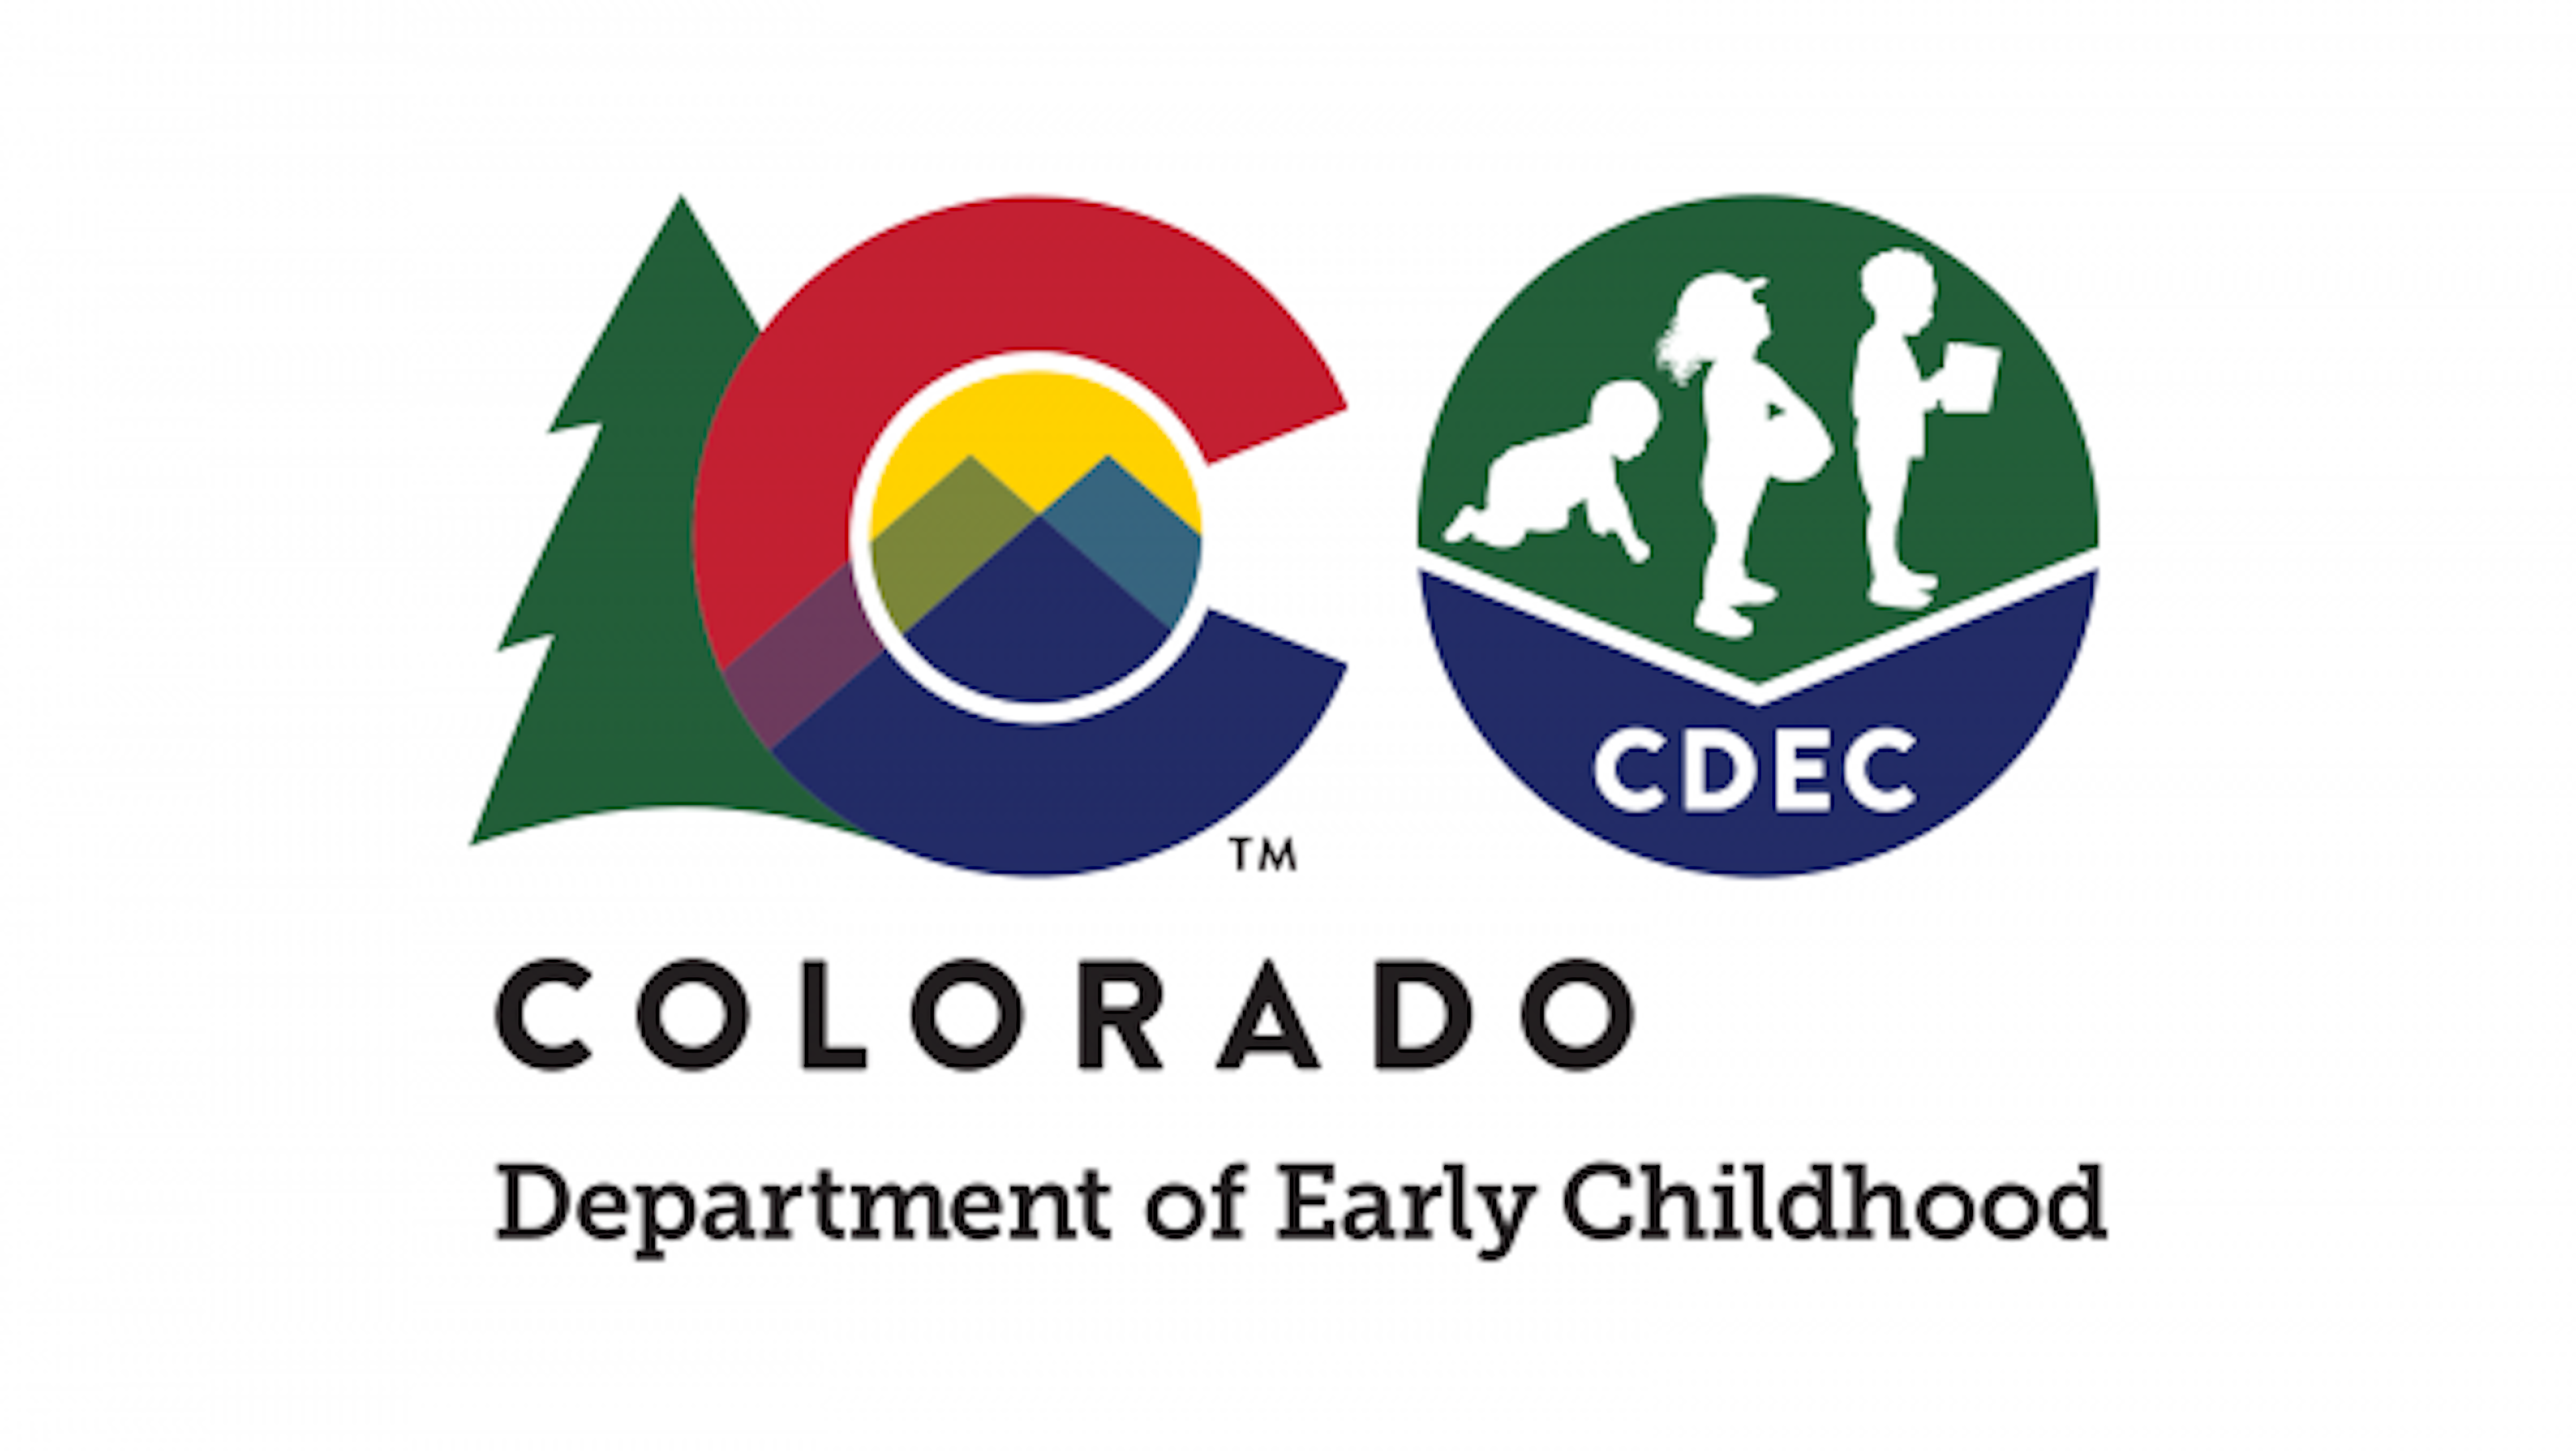 Colorado department of early childhood logo